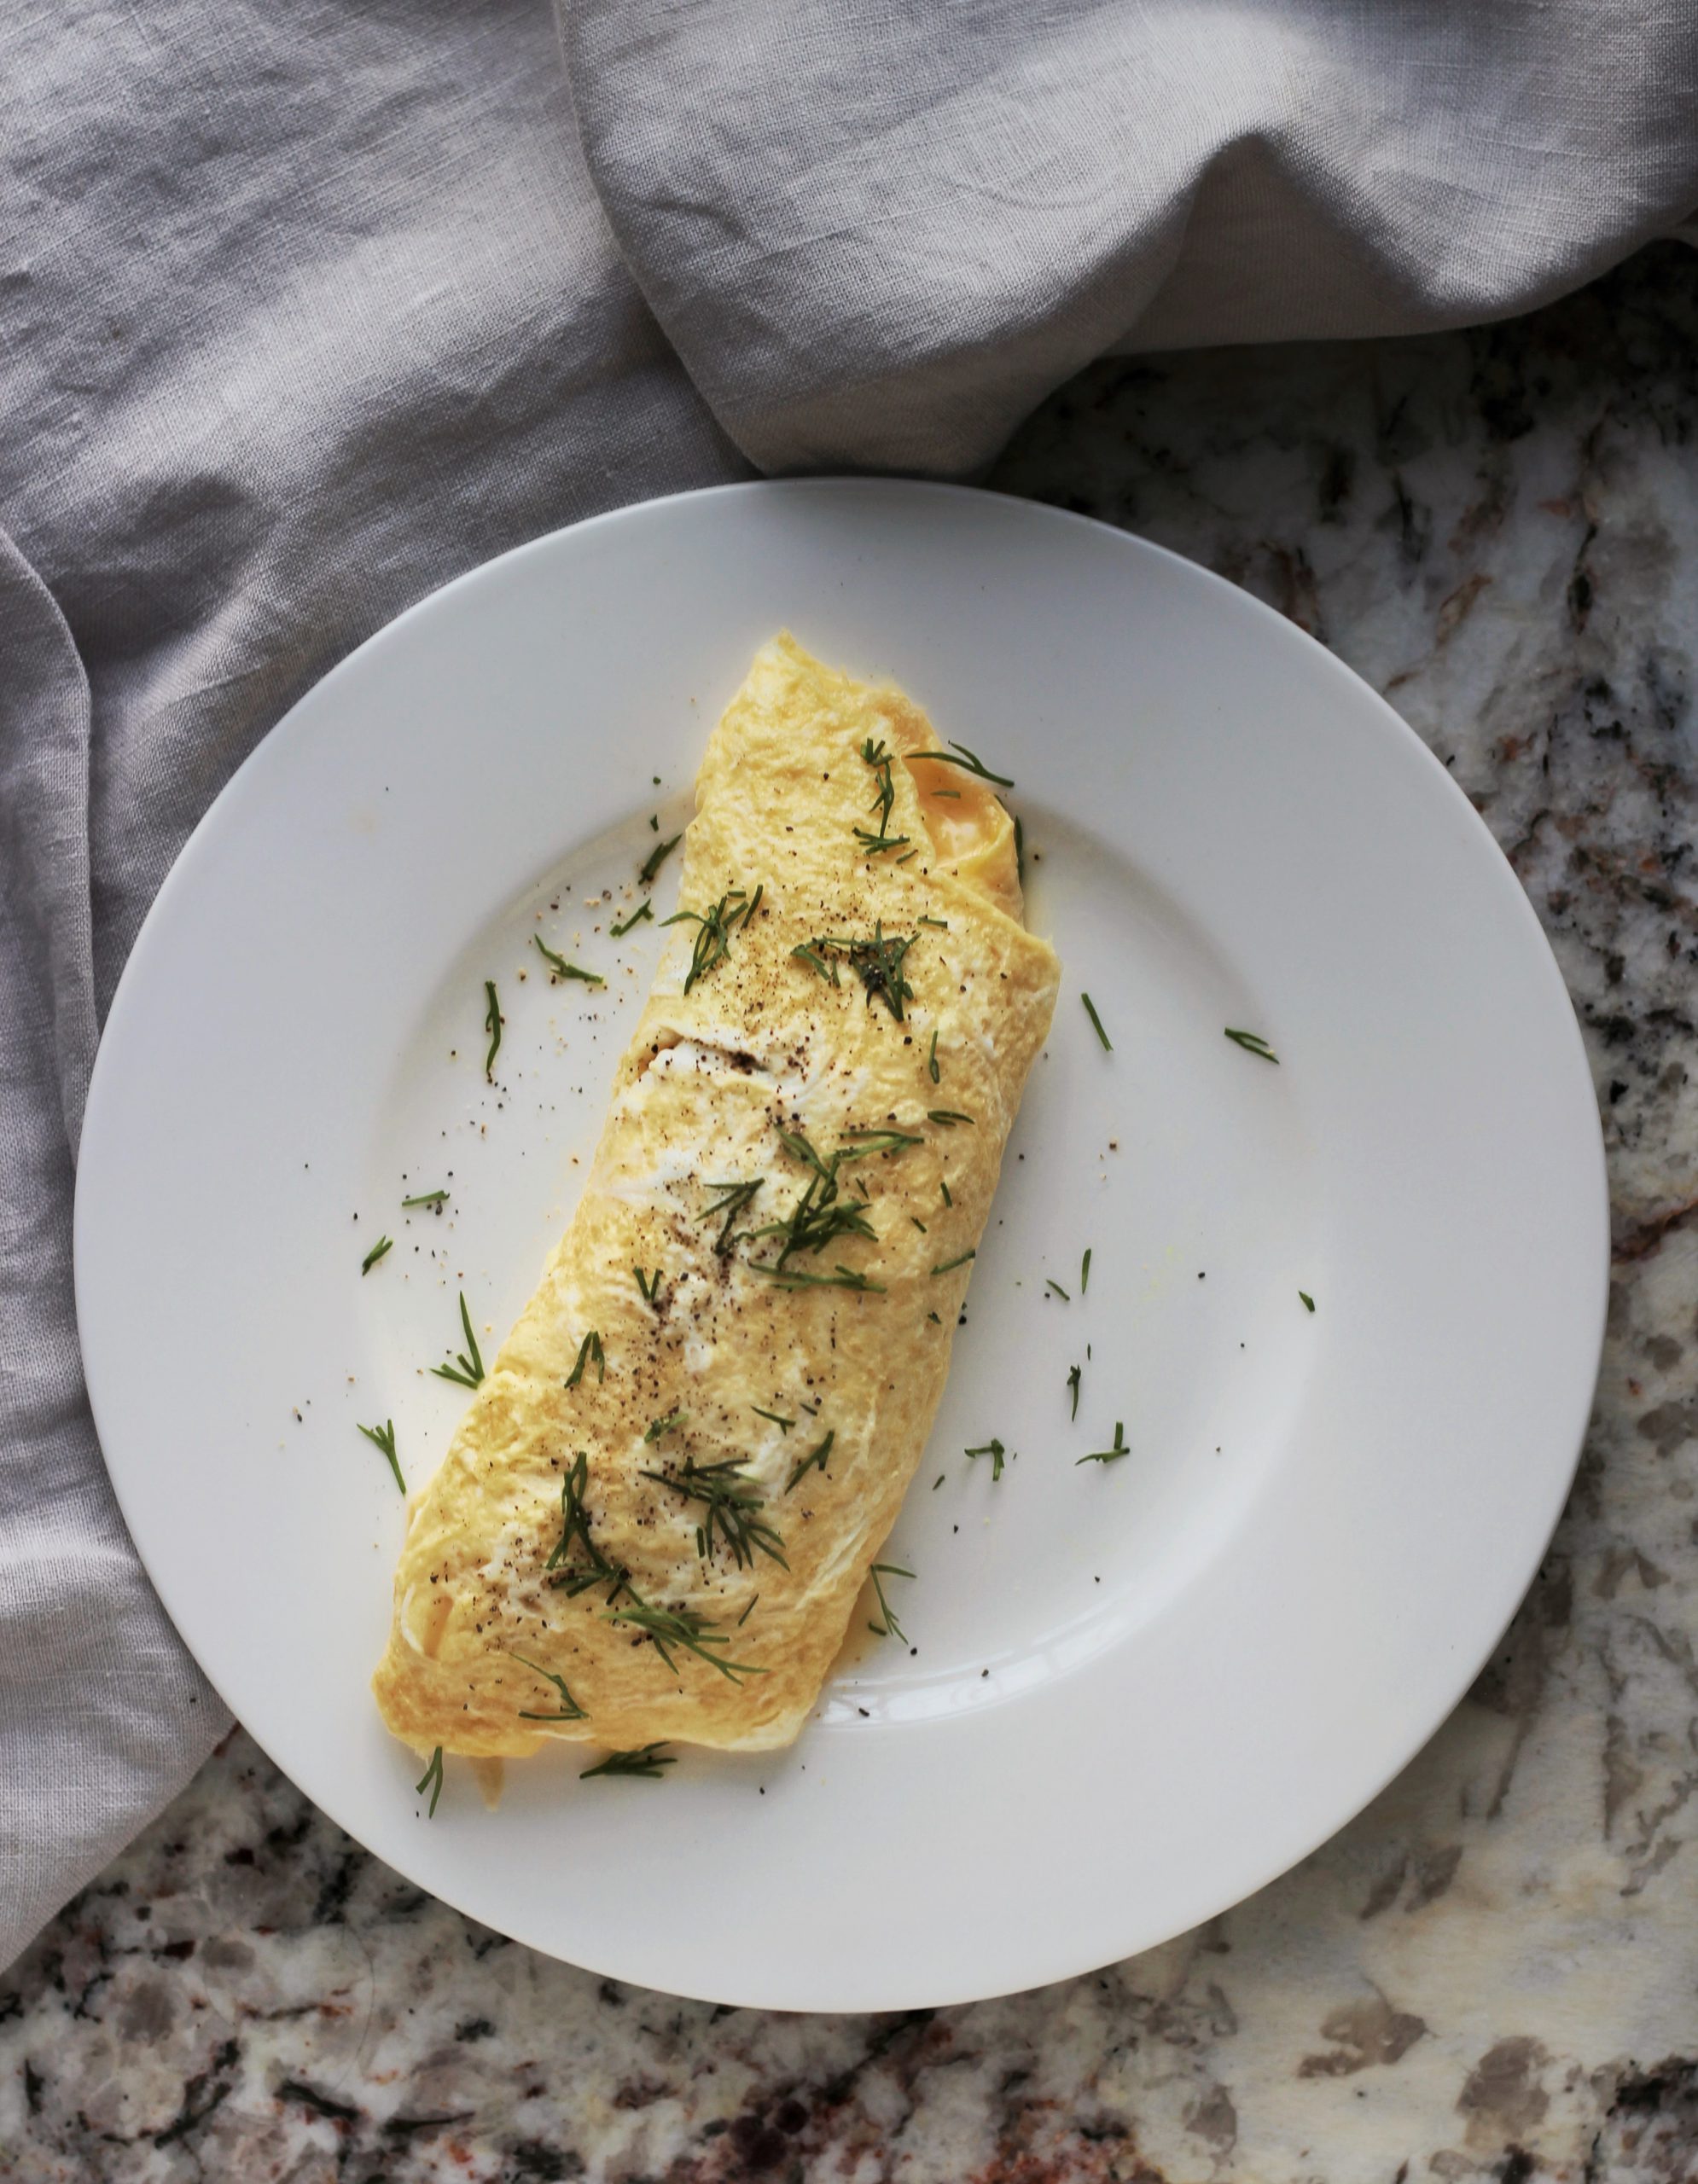 How to Make a French Omelette